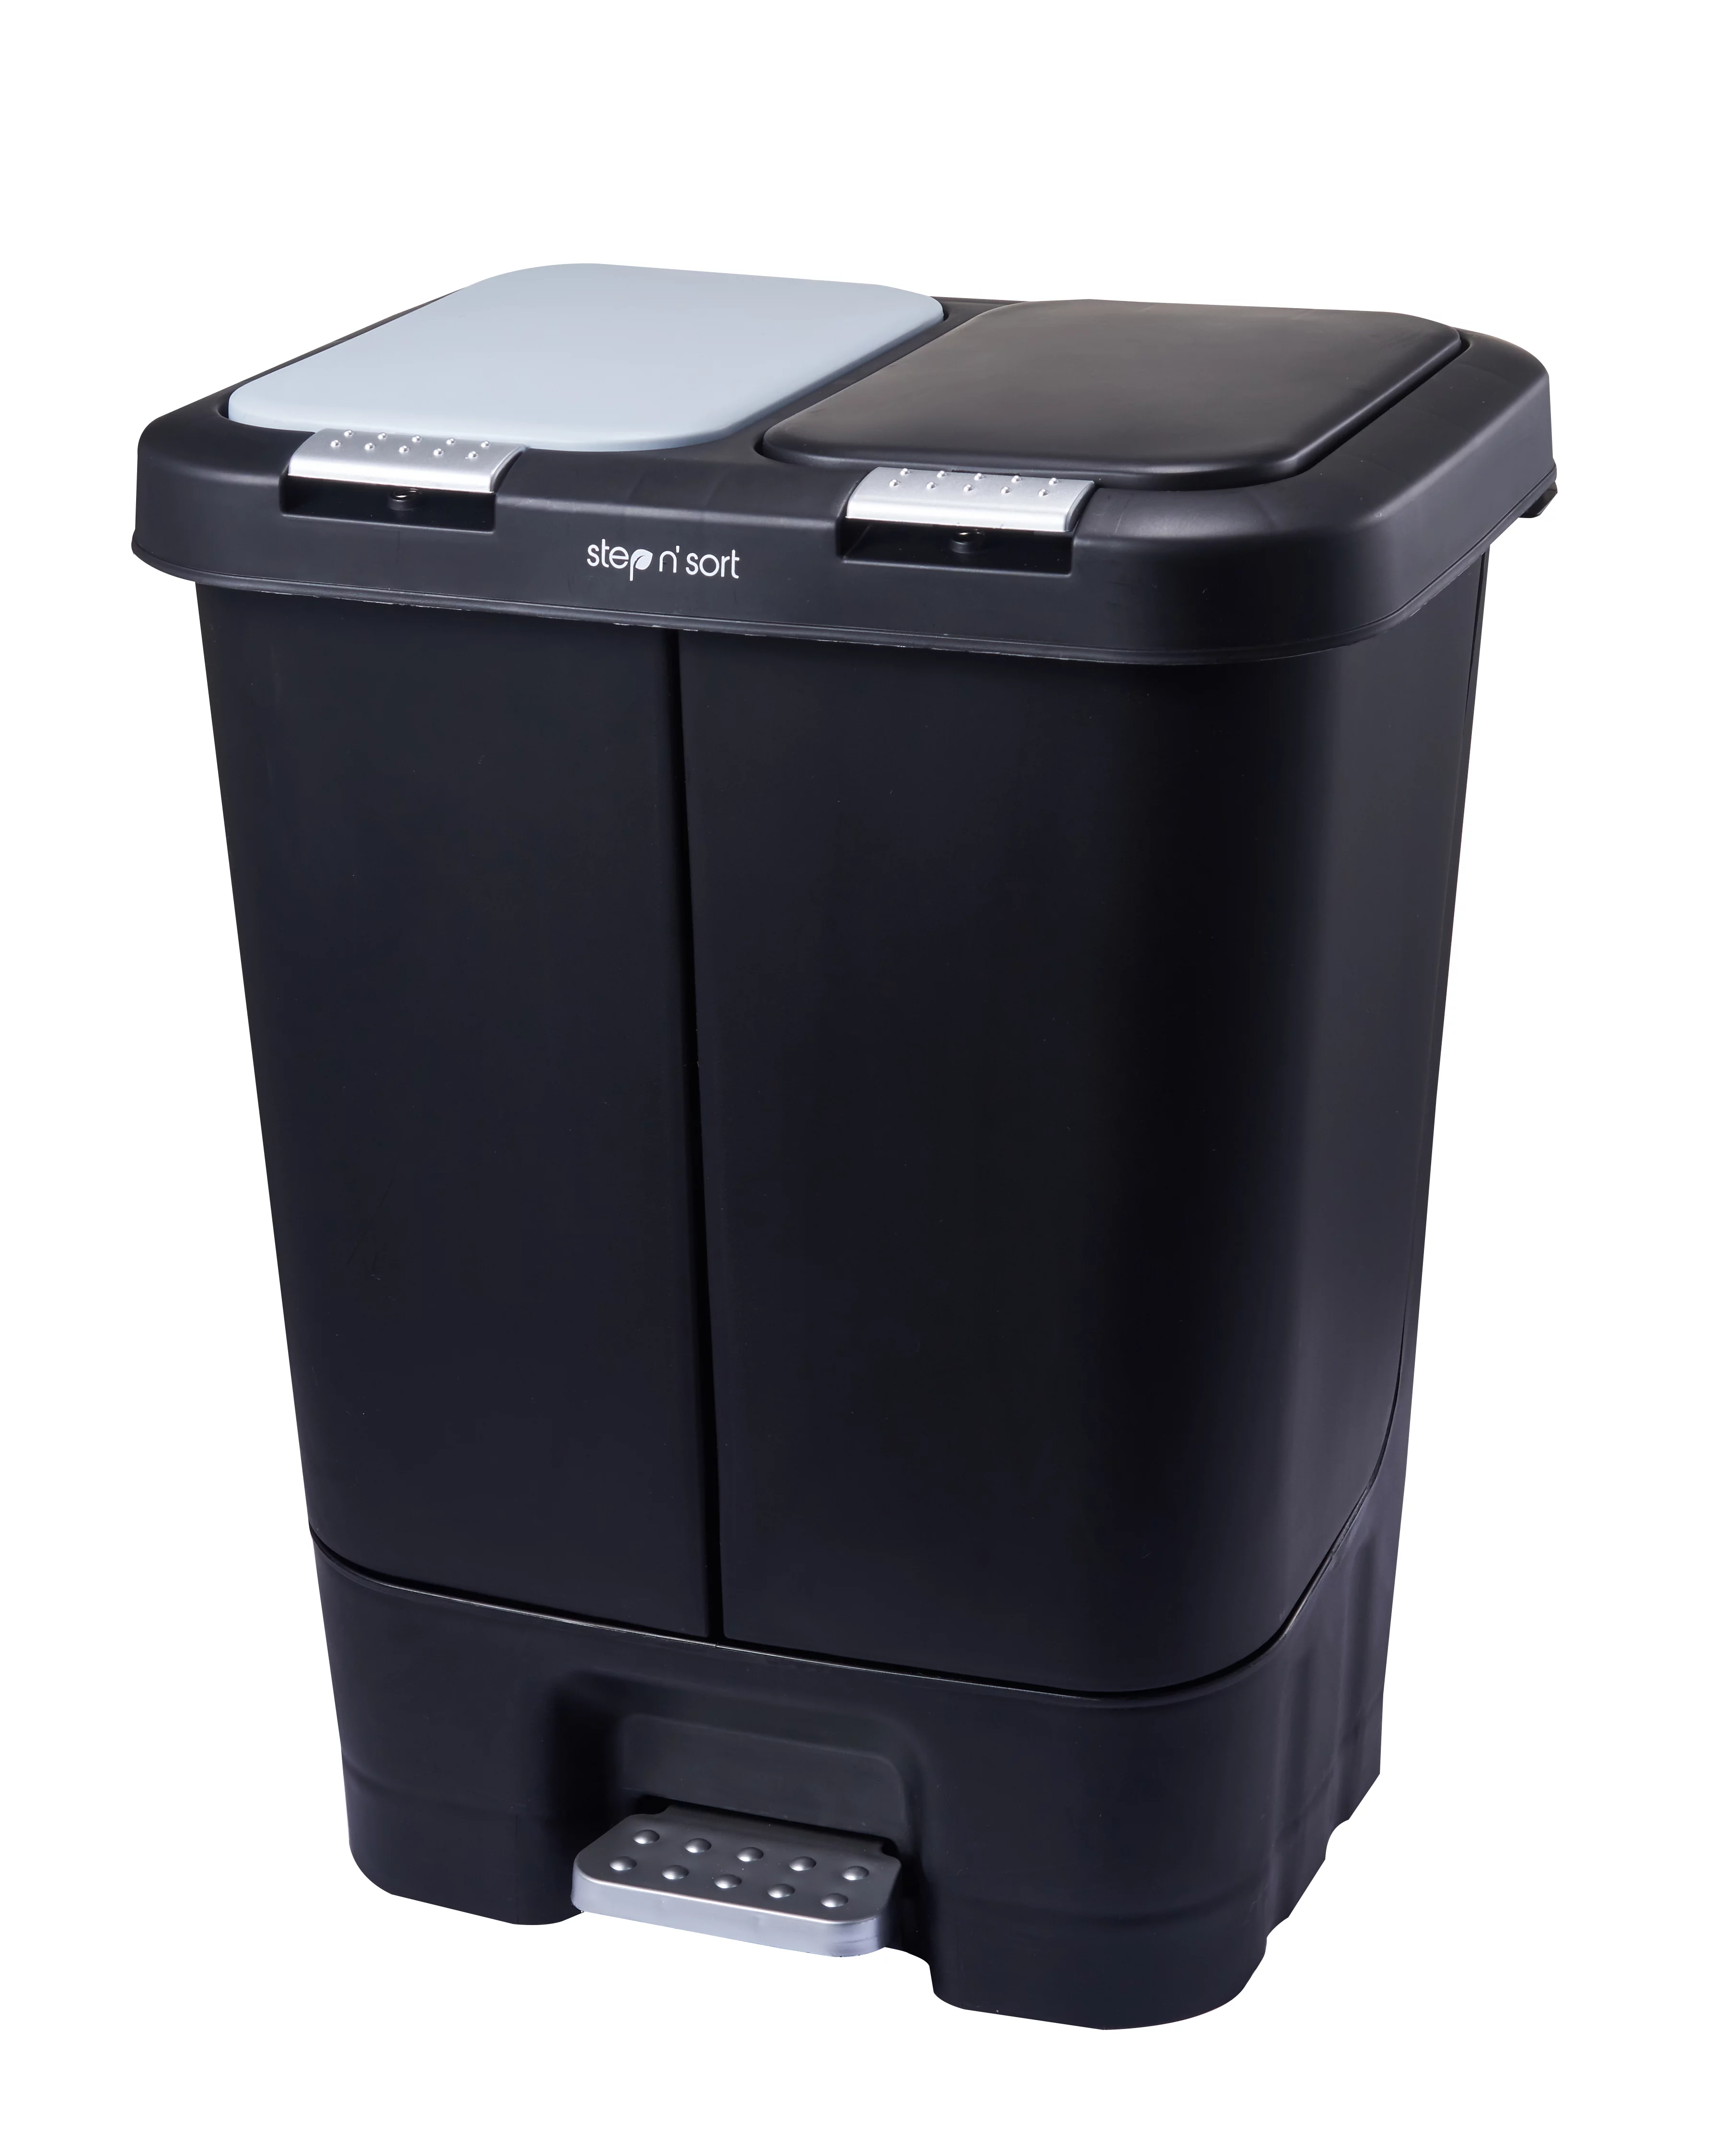 The Step N Sort 11 Gallon, Dual Trash and Recycle Bin with Slow Close Lid (Multiple Colors)